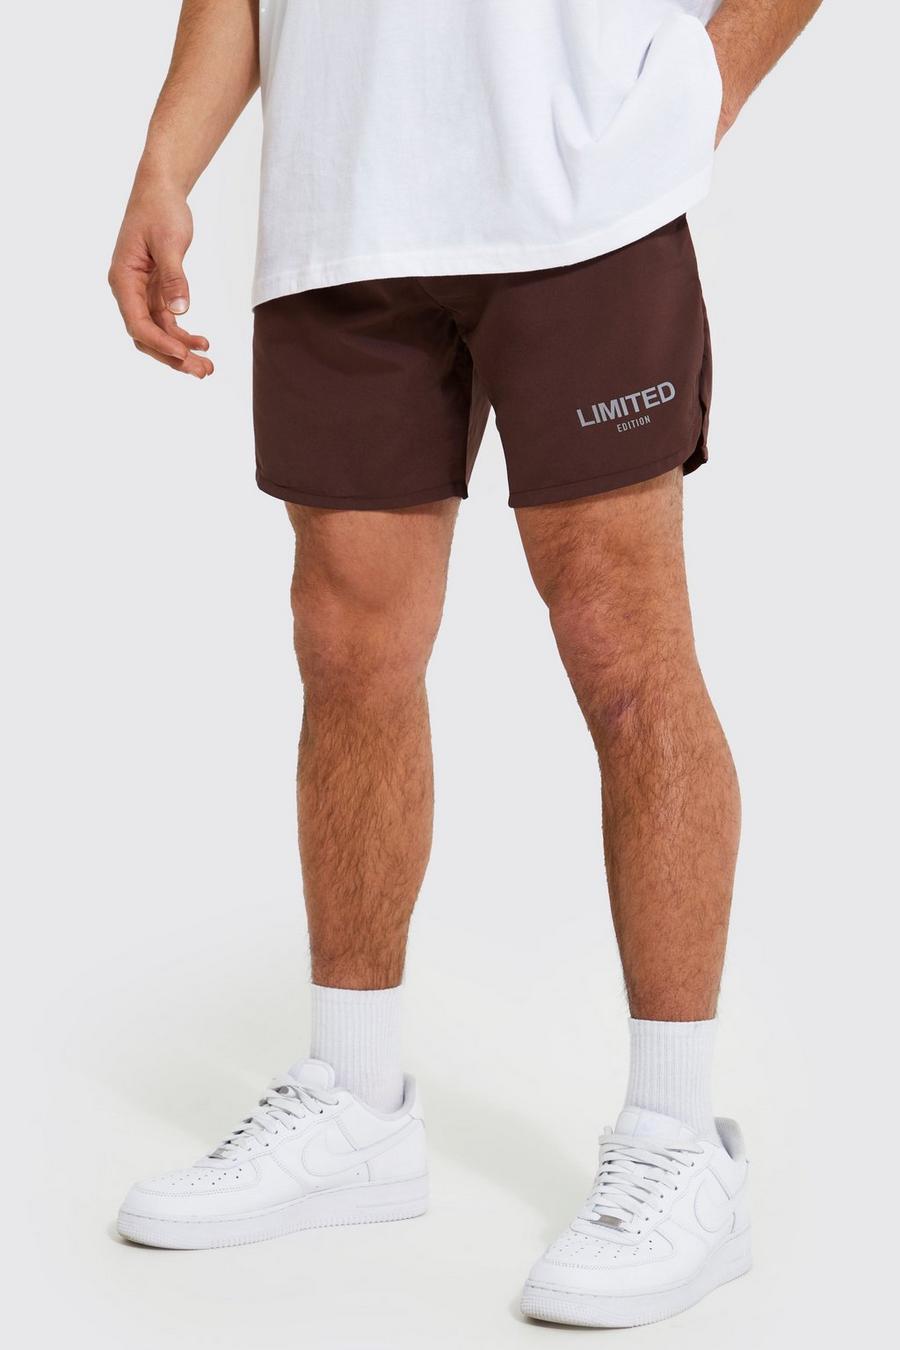 Chocolate brown Regular Fit Peached Shell Limited Shorts 